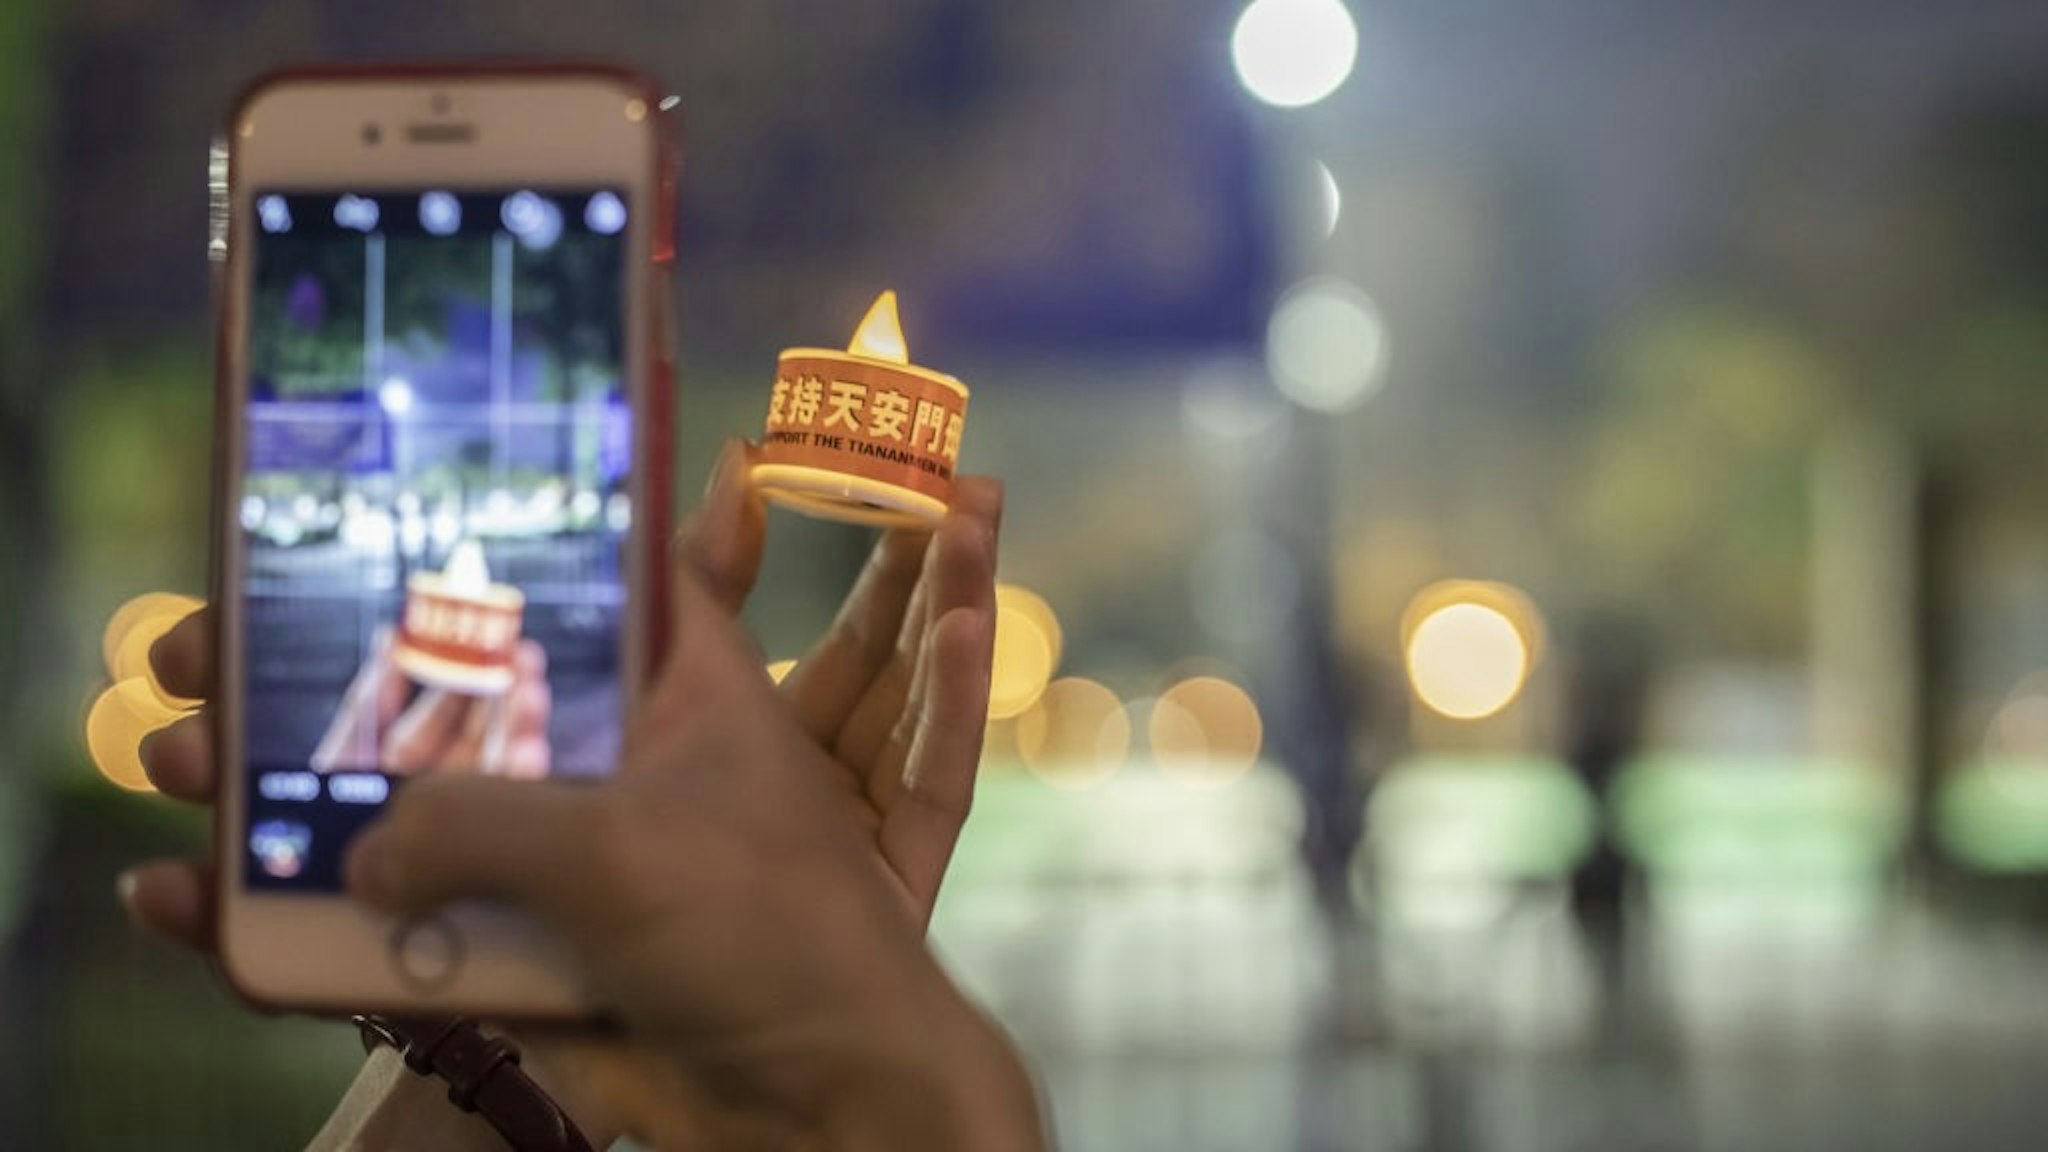 Hong Kong Police Bans Annual Tiananmen Vigil For The Second Straight Year A person takes a photo of an electronic candle outside Victoria Park, the traditional site of the annual Tiananmen candlelight vigil, in Hong Kong, China, on Friday, June 4, 2021. Hong Kong police on Friday warned democracy activists trying to commemorate Chinas deadly Tiananmen Square crackdown in 1989 that they could be violating the sweeping national security law imposed by China. Photographer: Paul Yeung/Bloomberg via Getty Images Bloomberg / Contributor via Getty Images